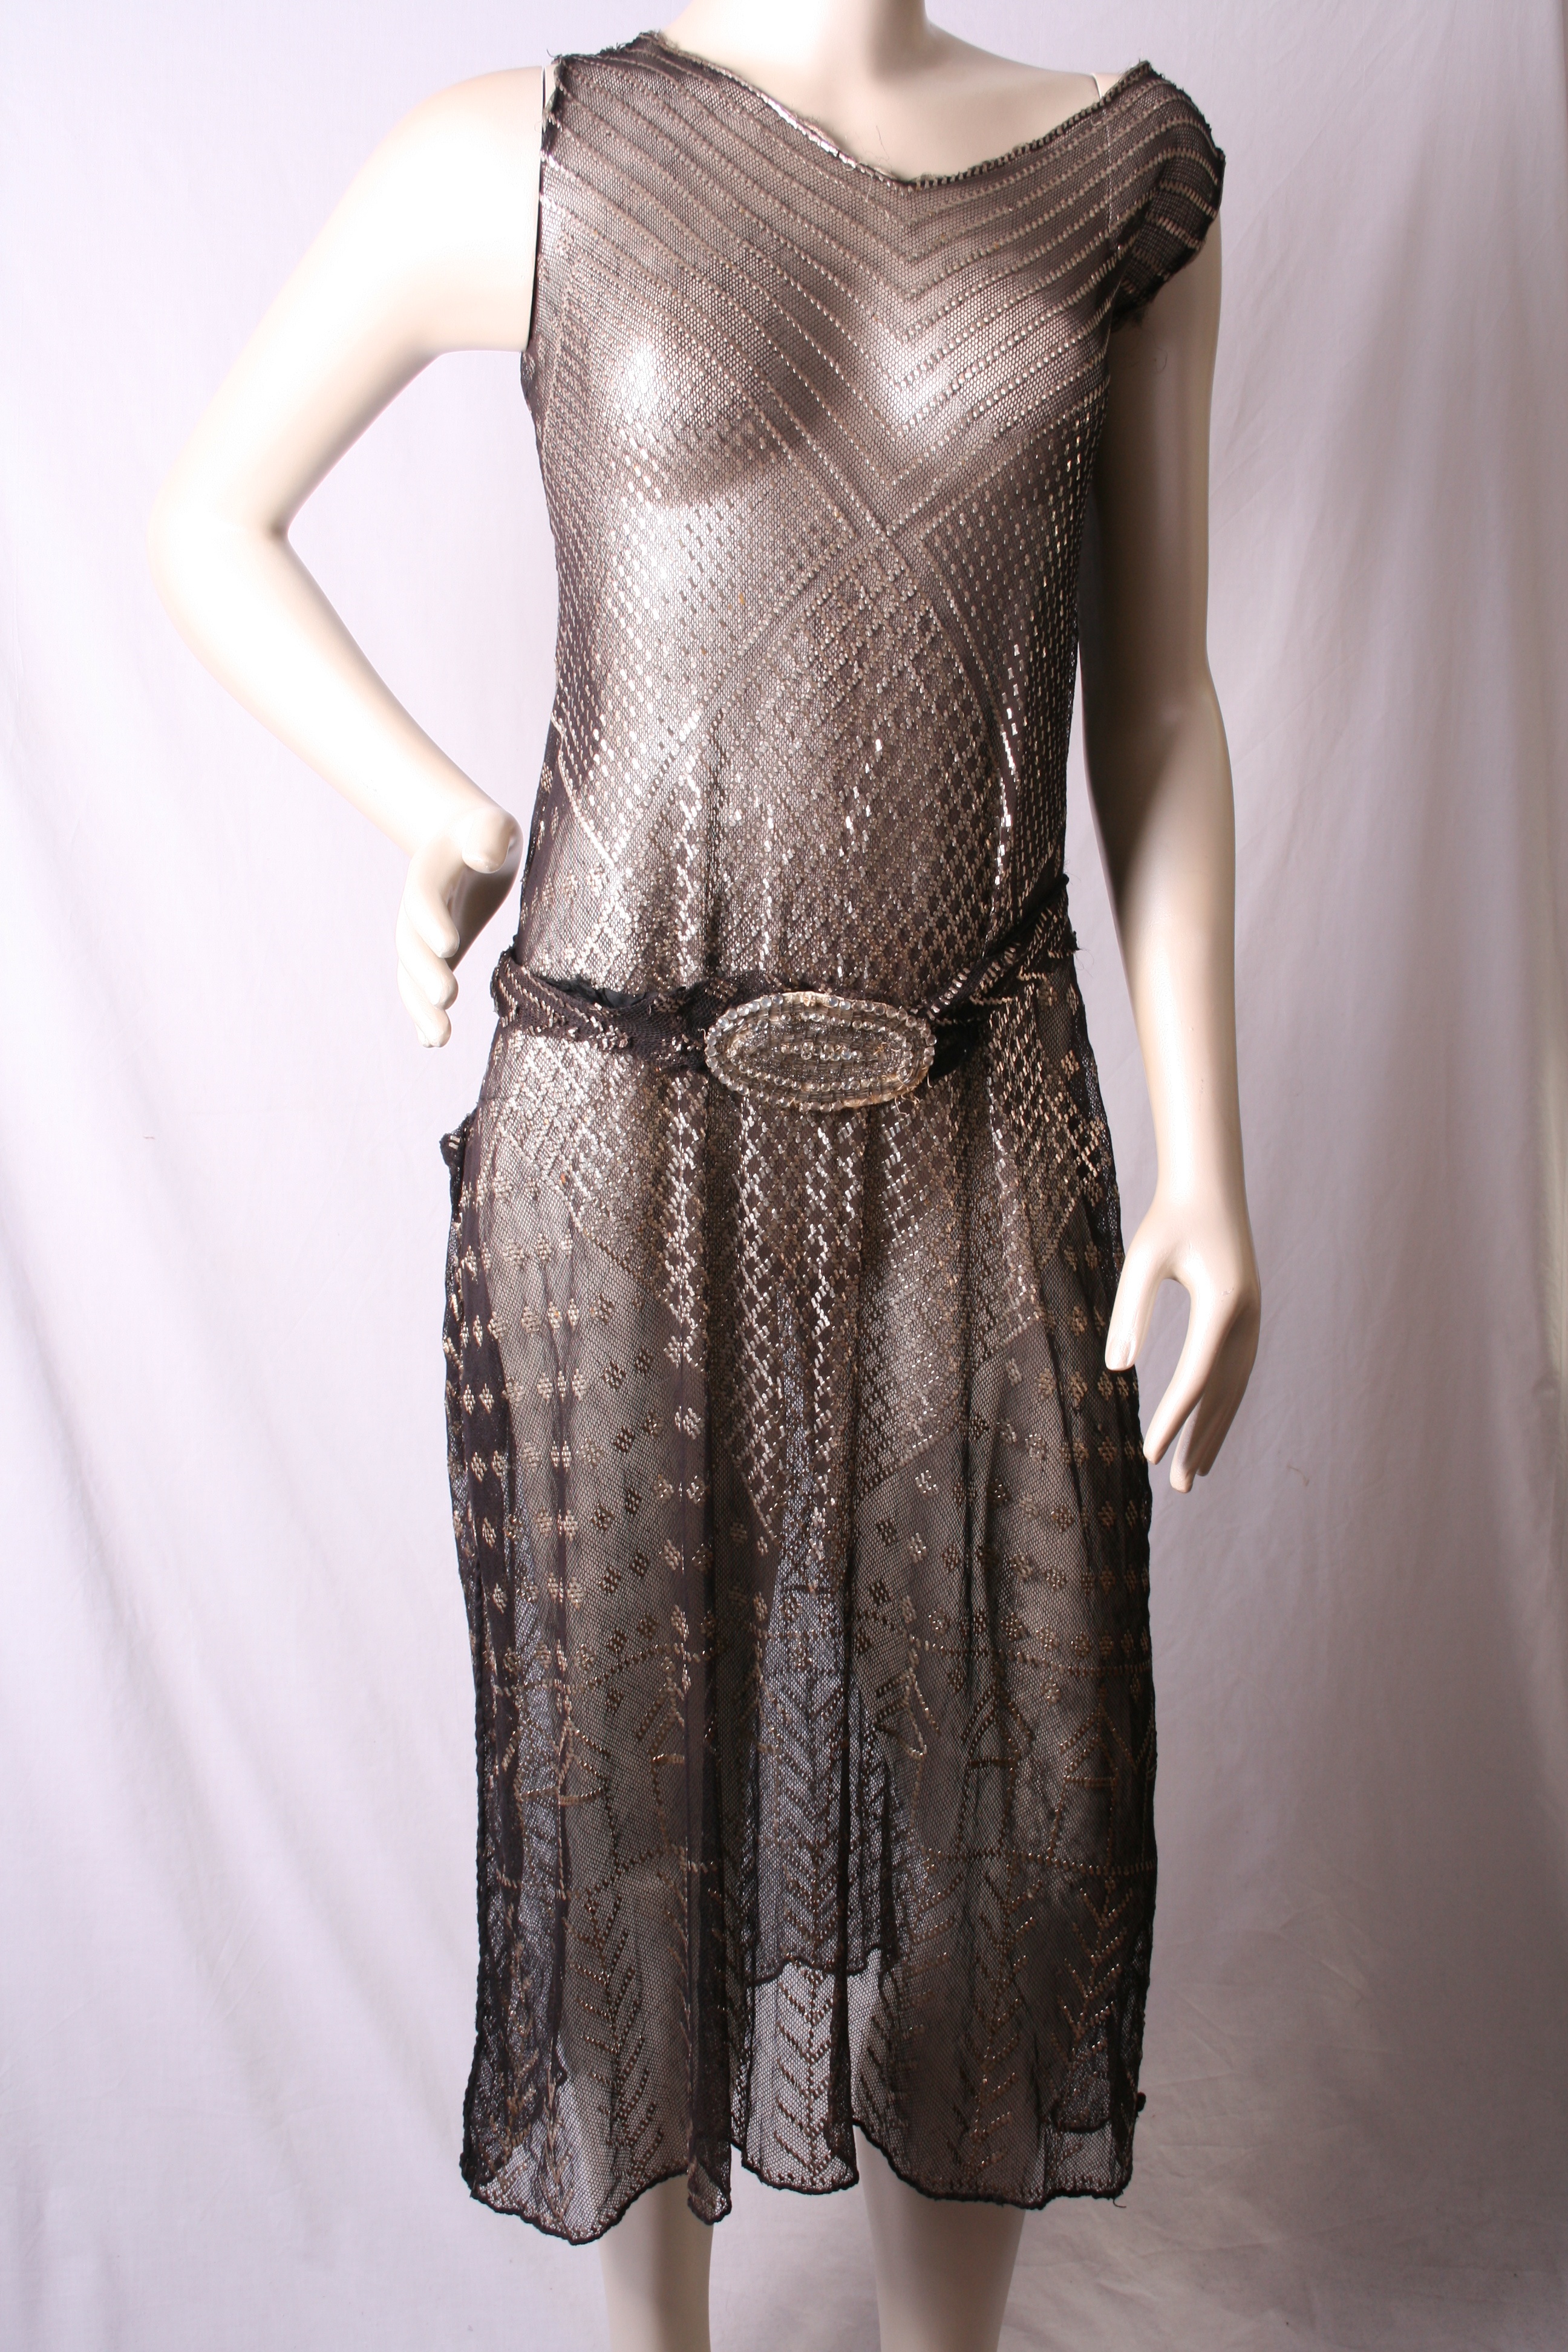 1920s dress having extensive metallic mesh work forming a large central diamond design and with a